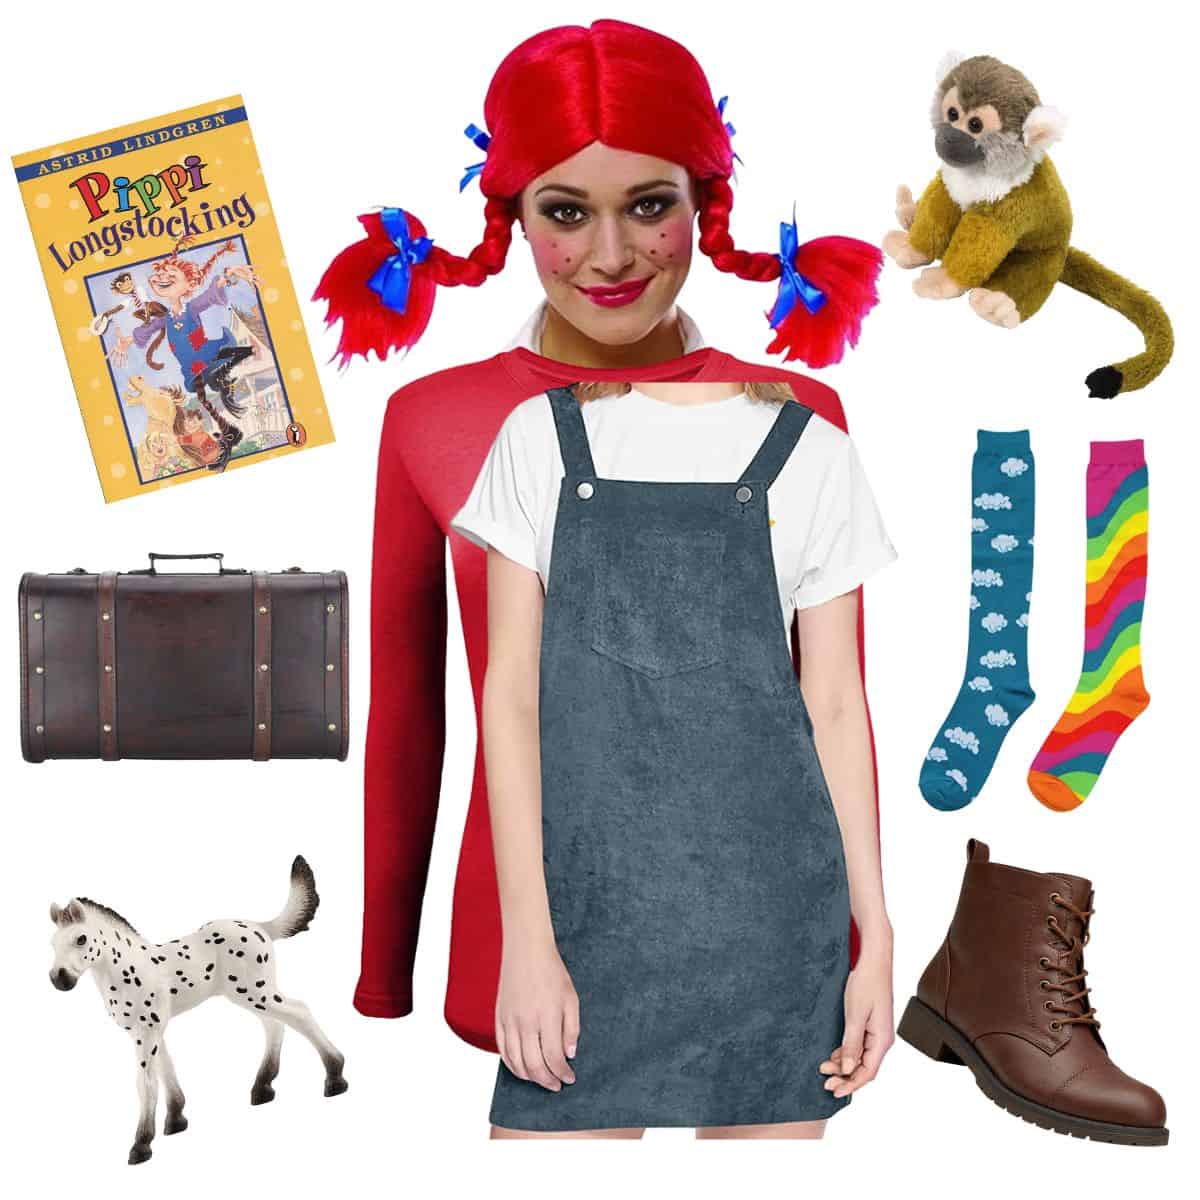 DIY Pippi Longstocking Costume for Adults (Cheap & Easy)